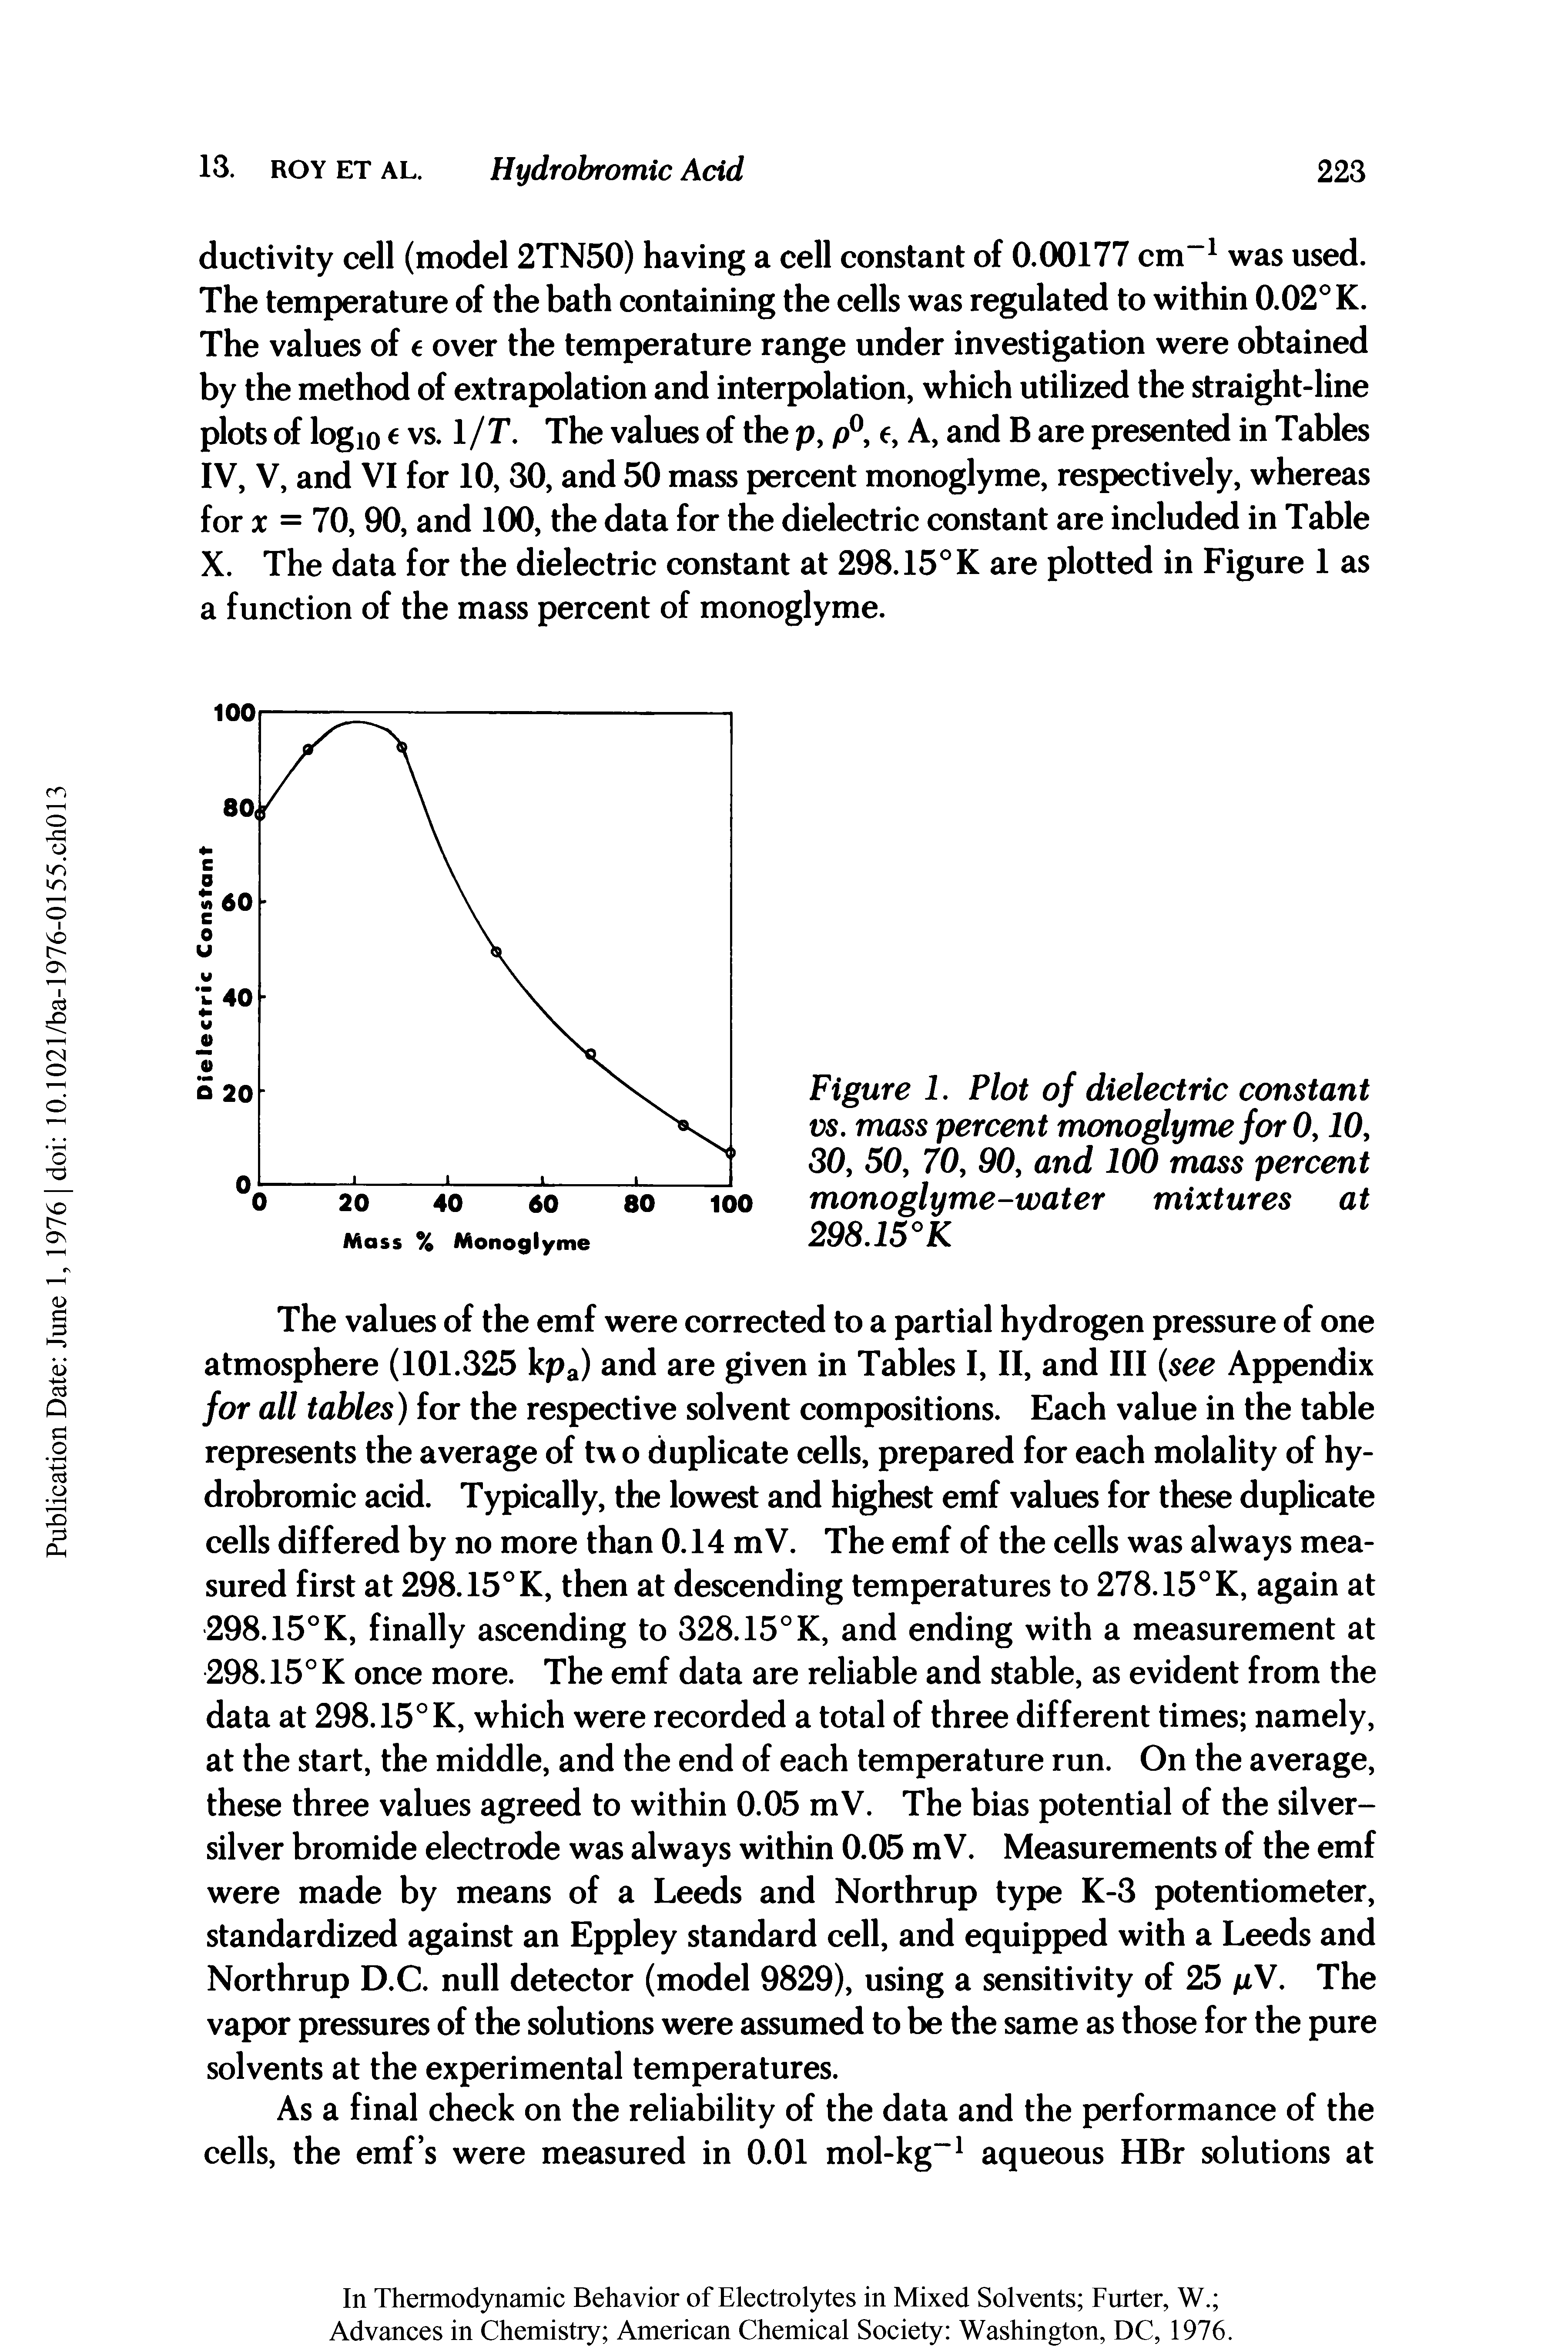 Figure 1. Plot of dielectric constant vs. mass percent monoglyme for 0,10, 30, 50, 70, 00, and 100 mass percent monoglyme-water mixtures at 298.15°K...